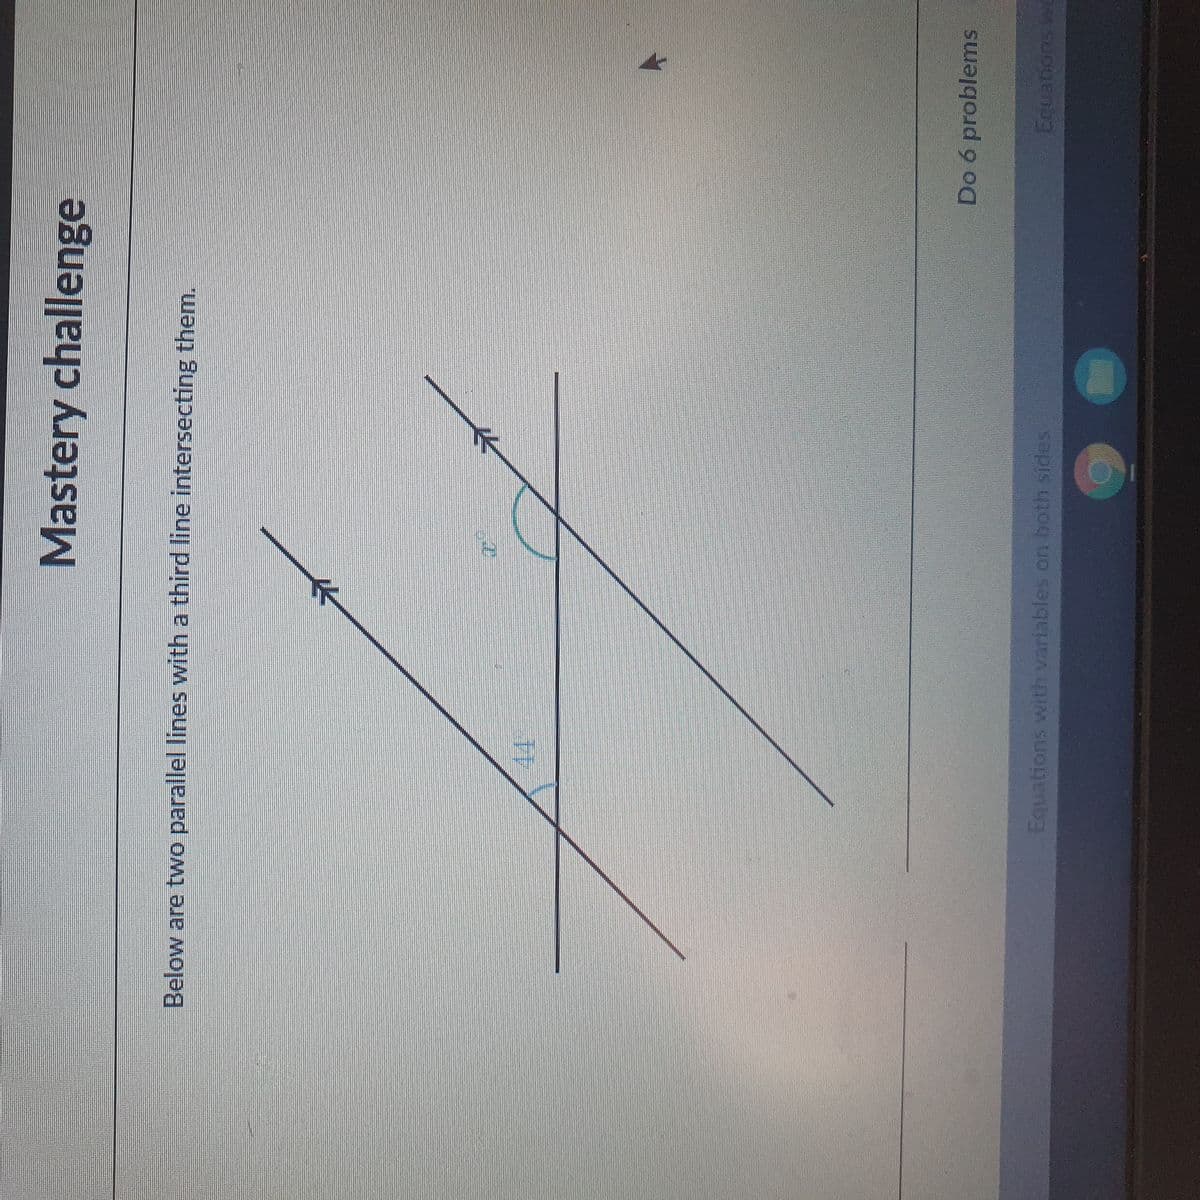 Mastery challenge
Below are two parallel lines with a third line intersecting them.
Do 6 problems
Equations with variables on both sides
